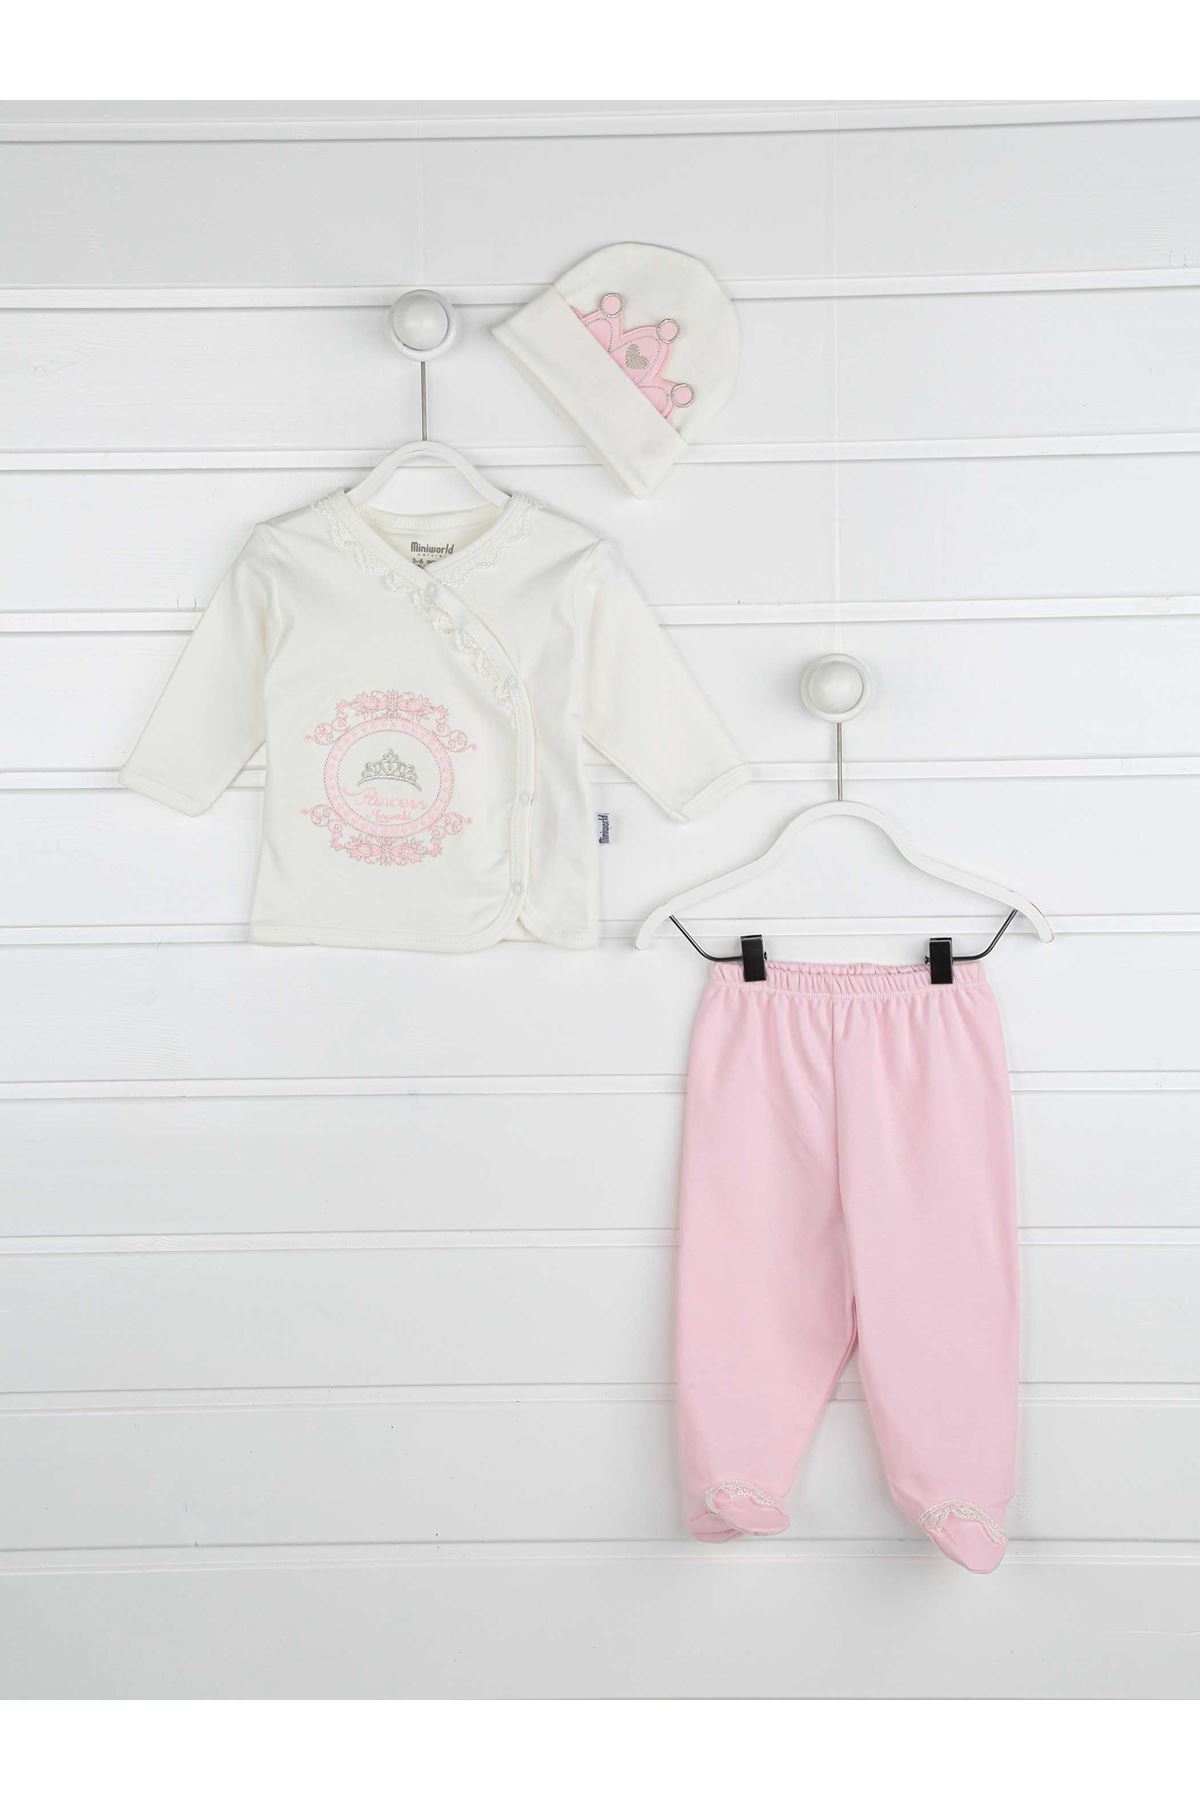 Pink princess baby girl 3-piece suit bottom clothing top hat cotton babies sets model